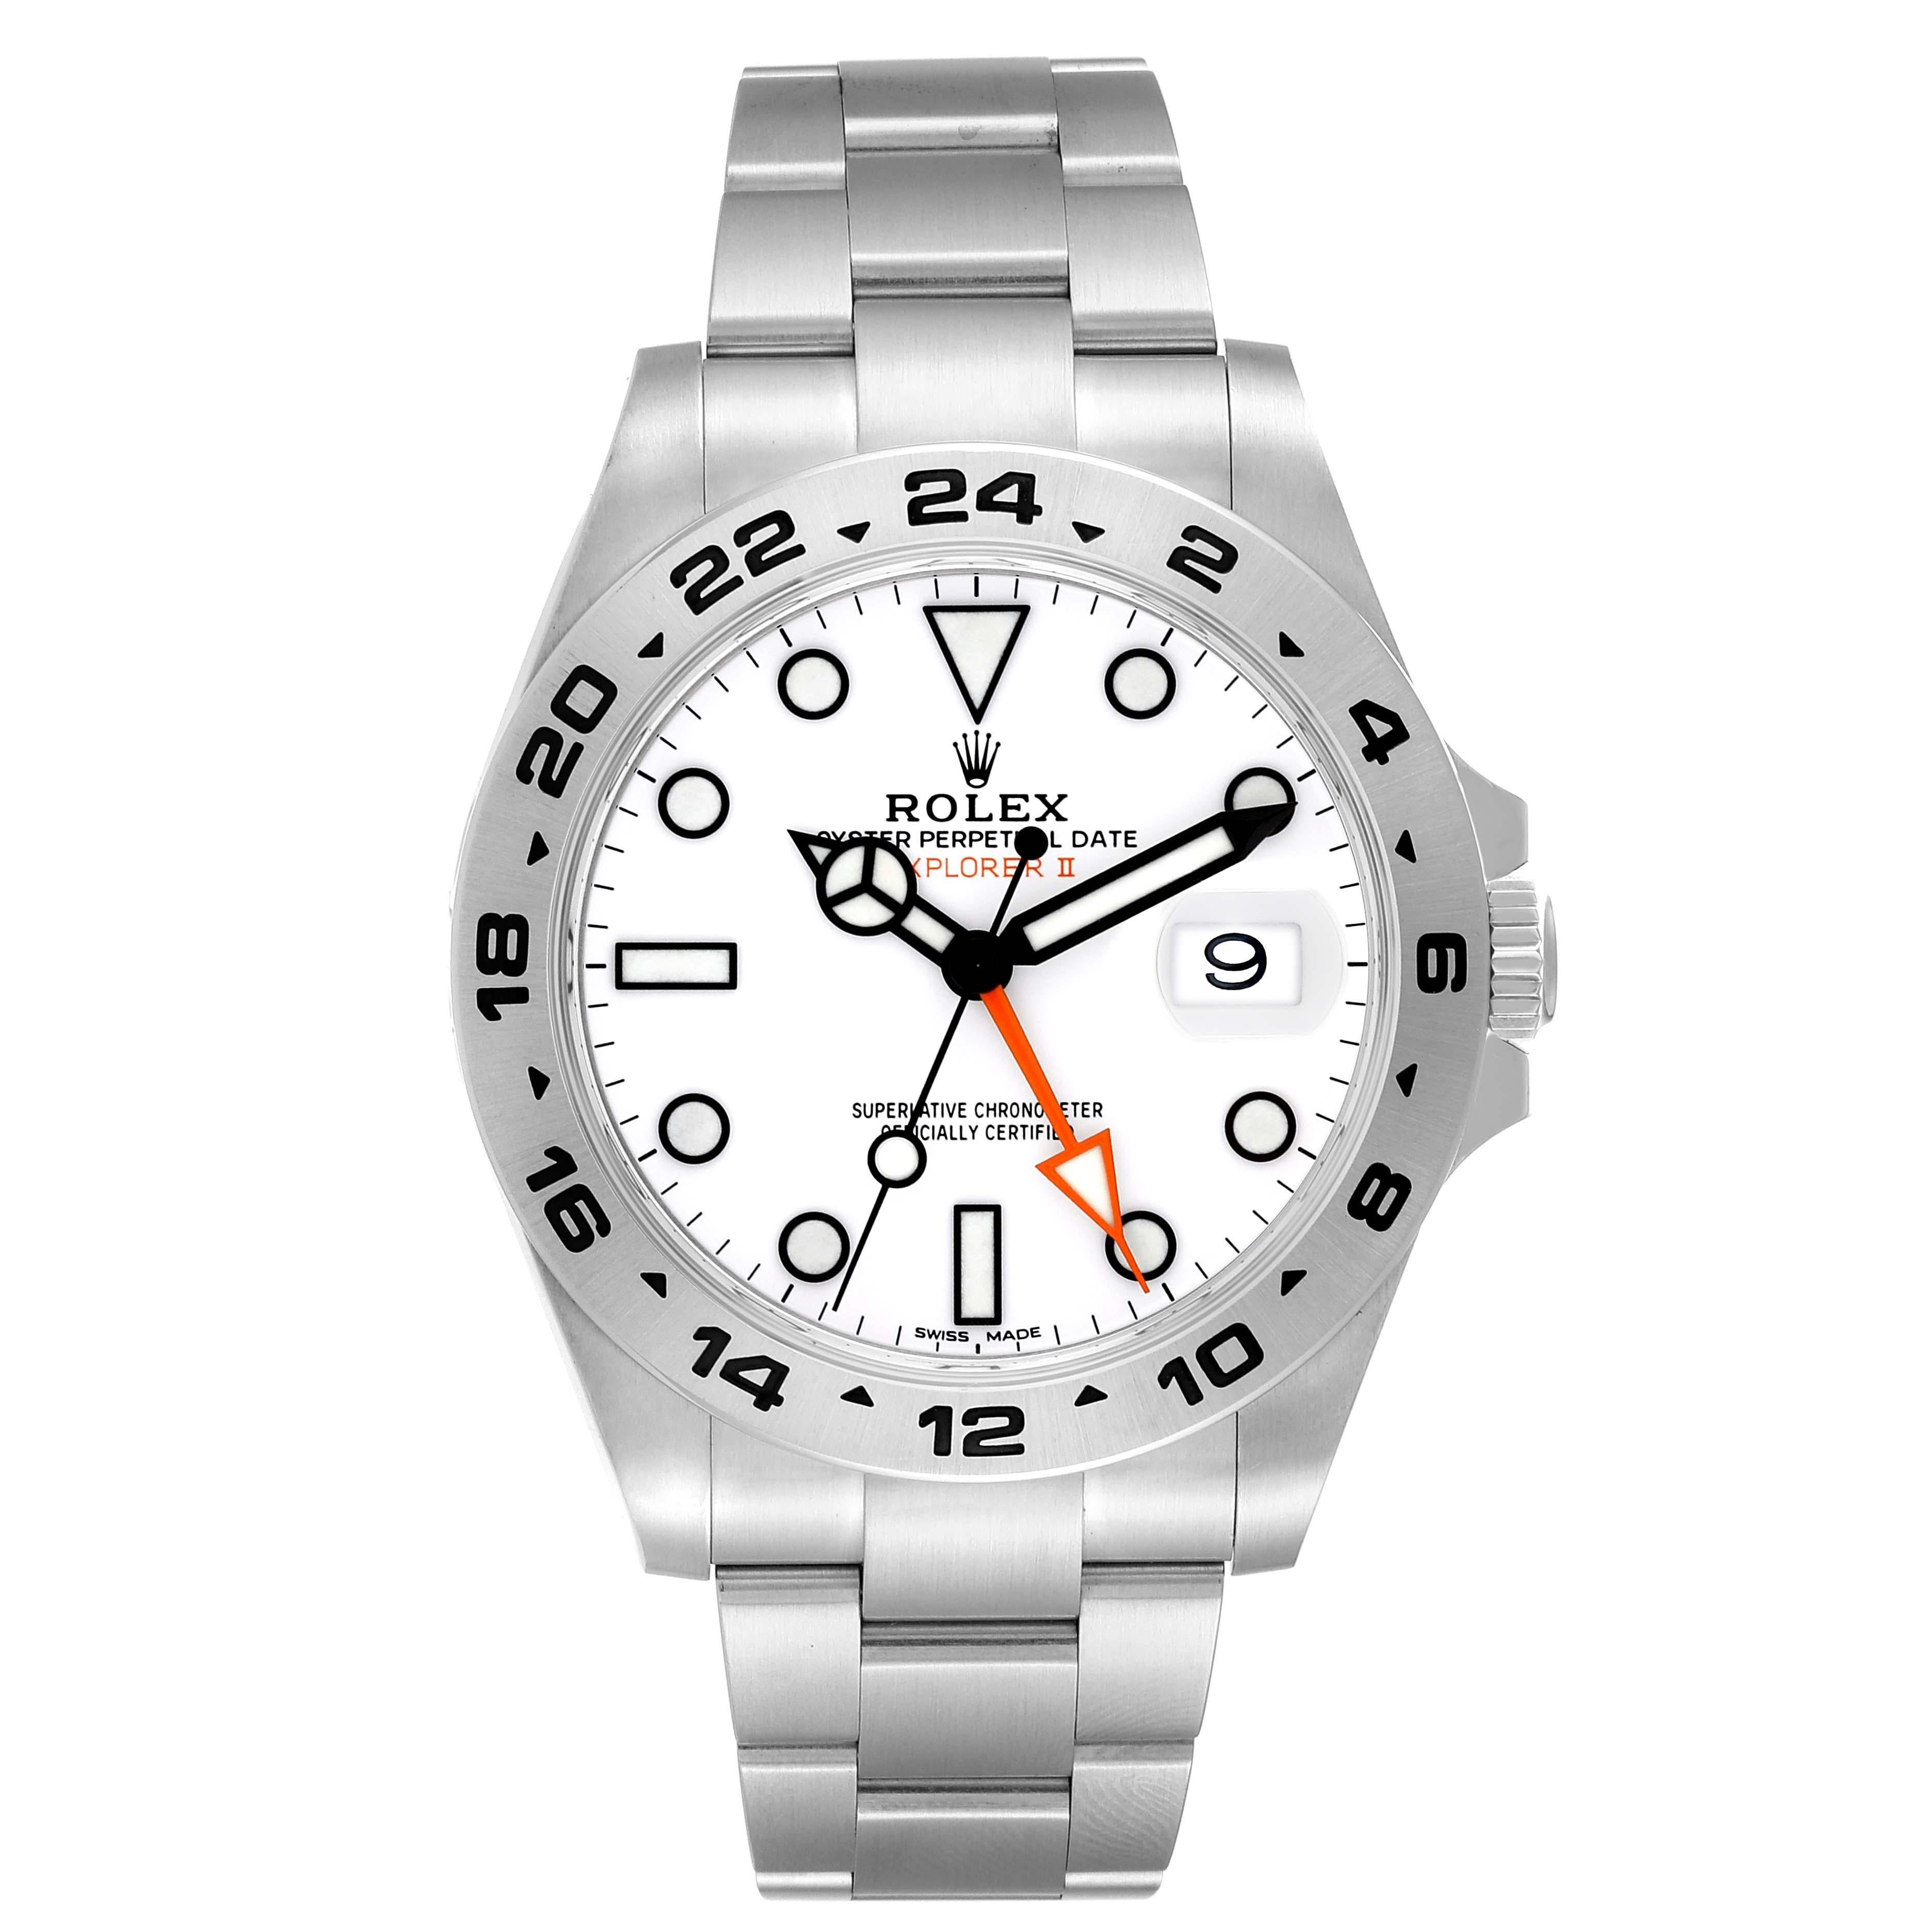 Rolex Explorer II White Dial Orange Hand Steel Mens Watch 216570 Box Card. Officially certified chronometer self-winding movement. Stainless steel case 42.0 mm in diameter. Rolex logo on a crown. Stainless steel tachymetric scale bezel. Scratch